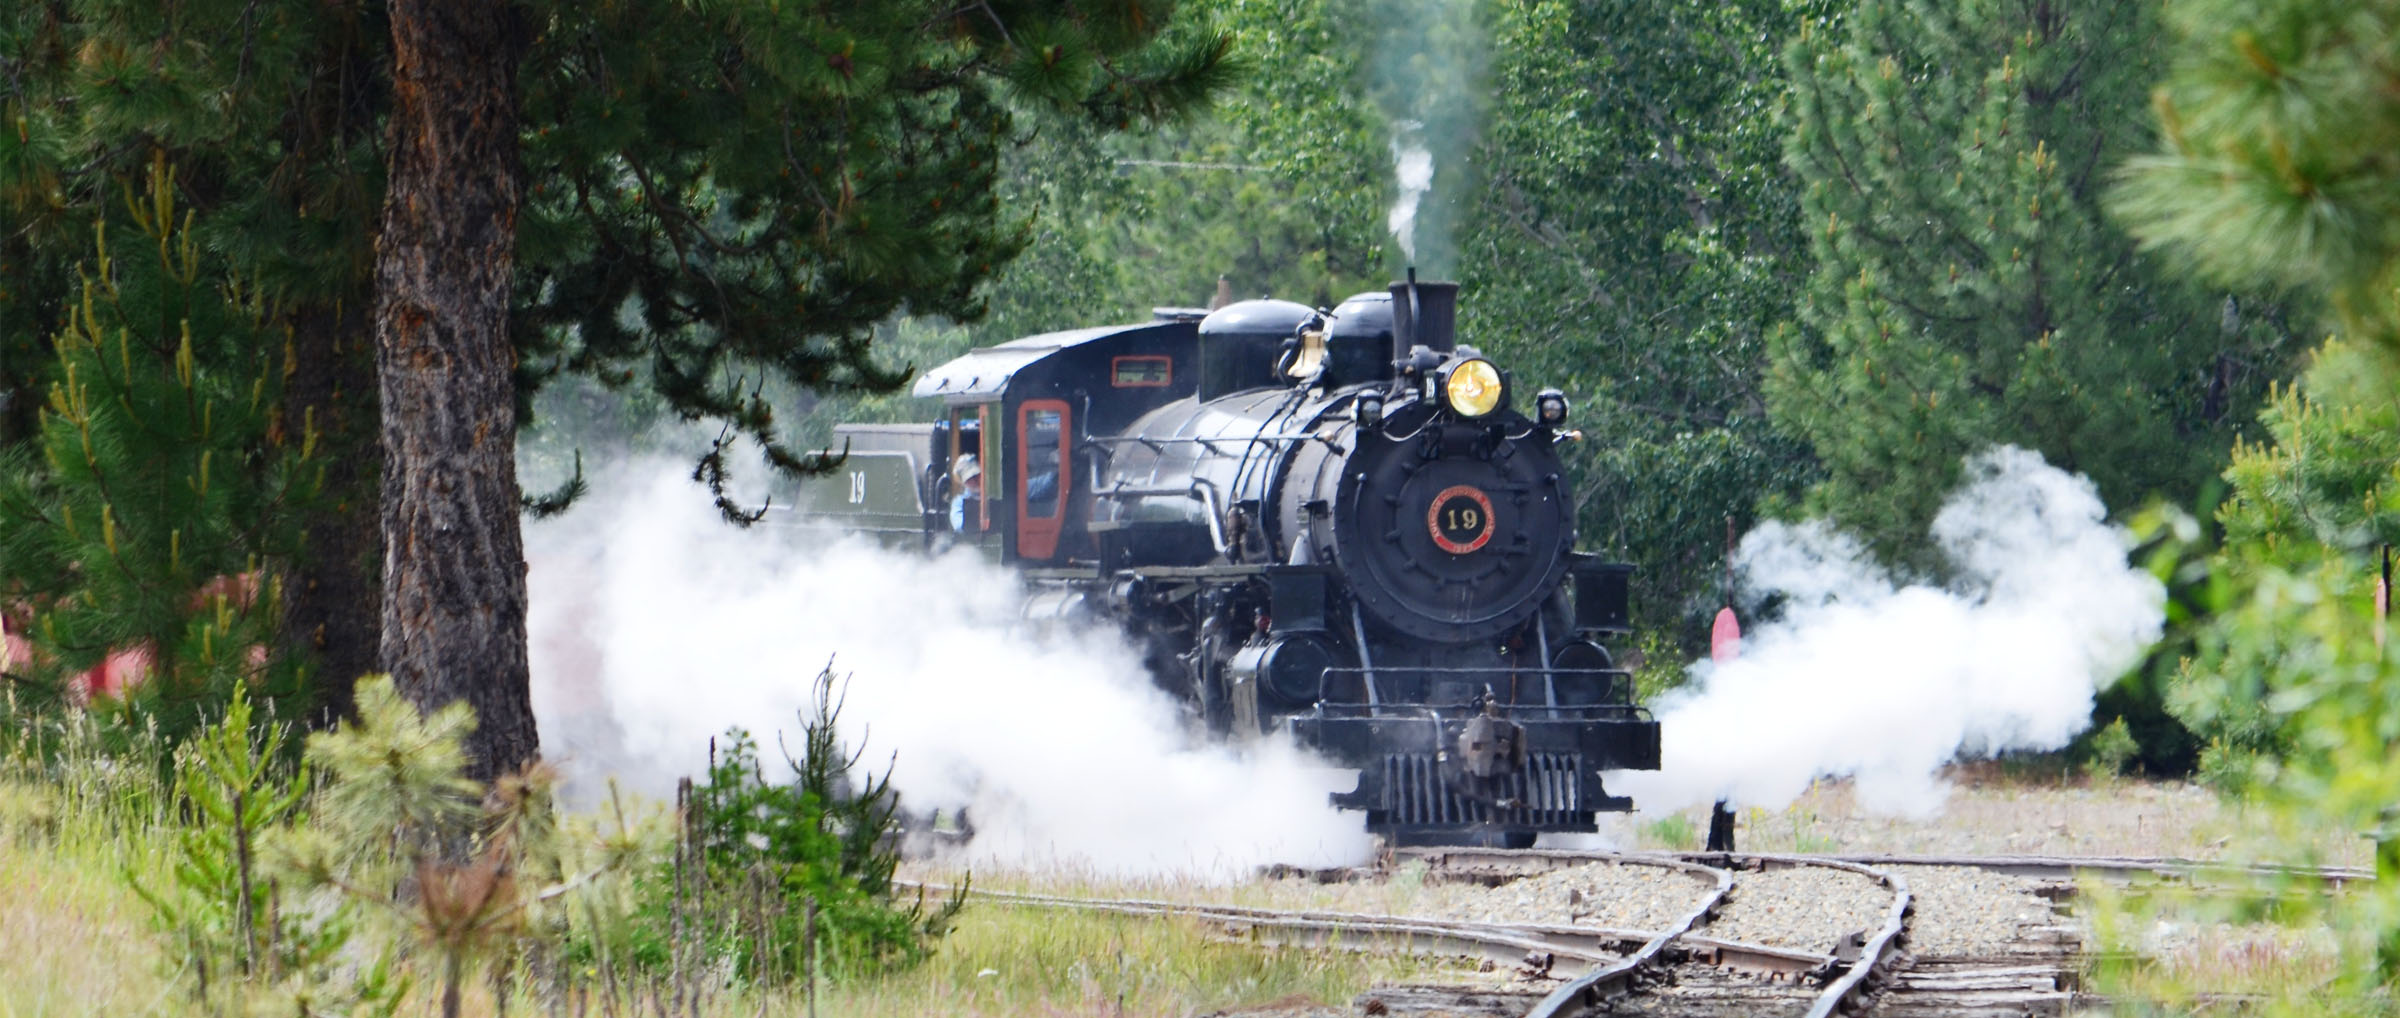 Sumpter Valley Rail Road Steam train coming around the corner